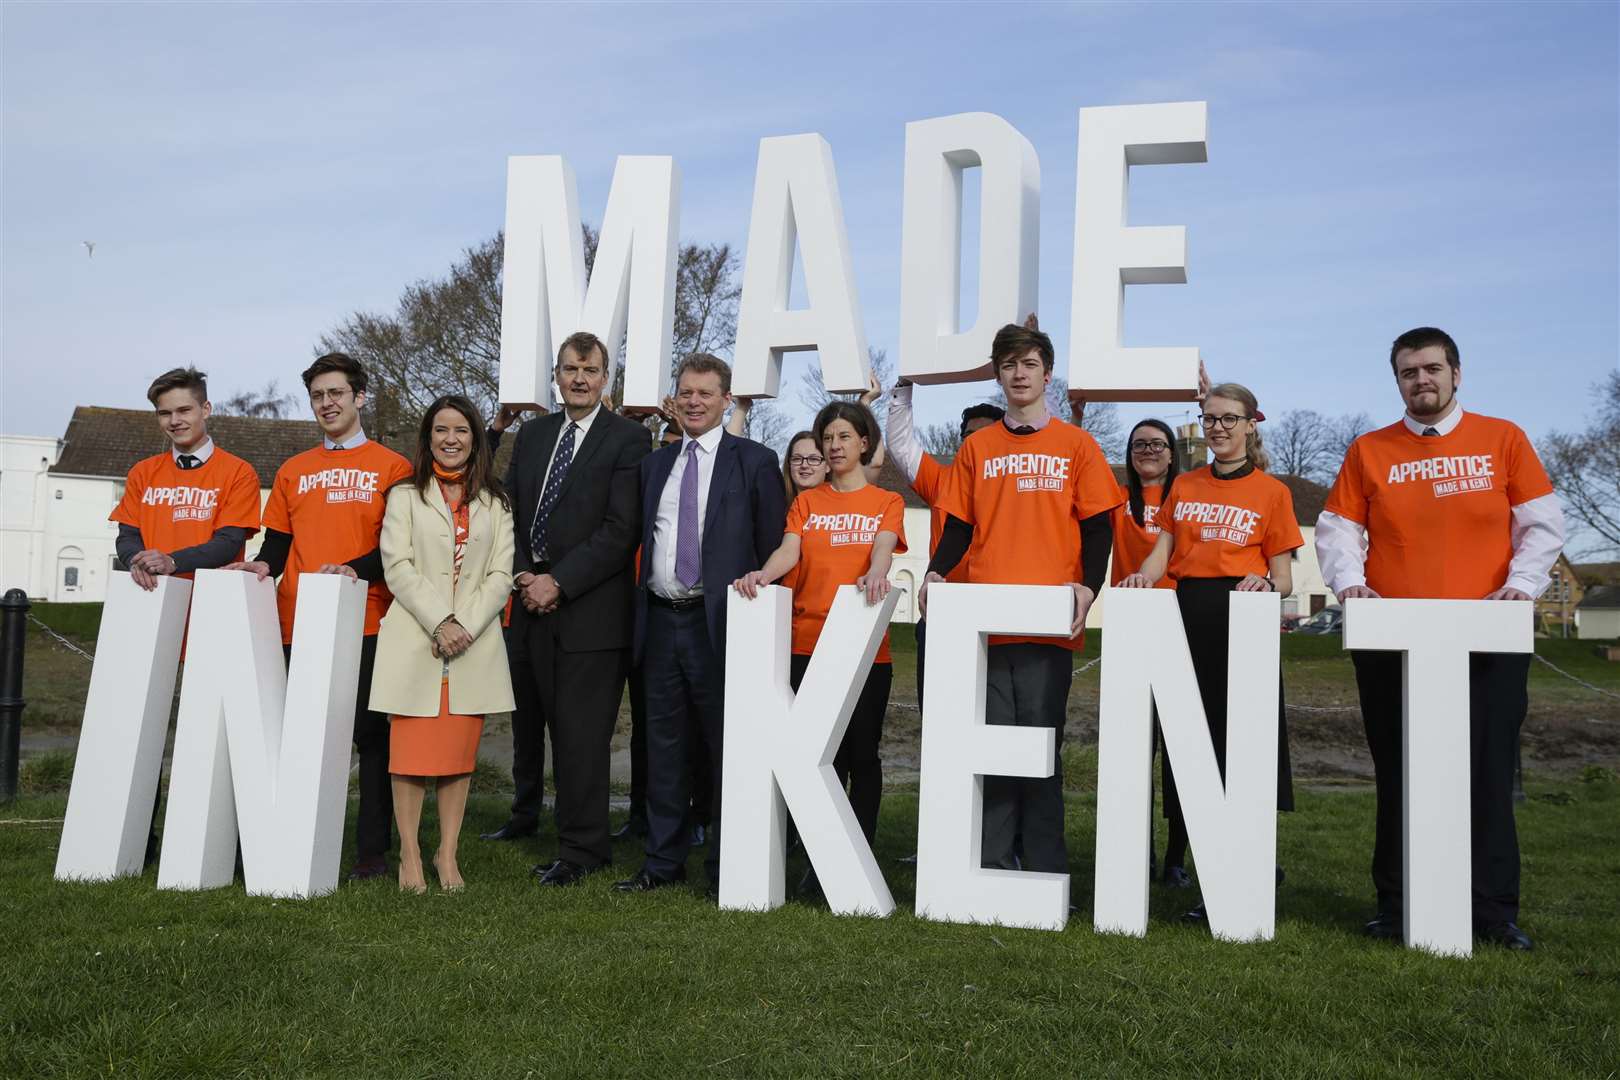 Angela Middleton, Cllr Paul Carter and Jonathan Neame join apprentices for the launch of Kent County Council's Made in Kent campaign